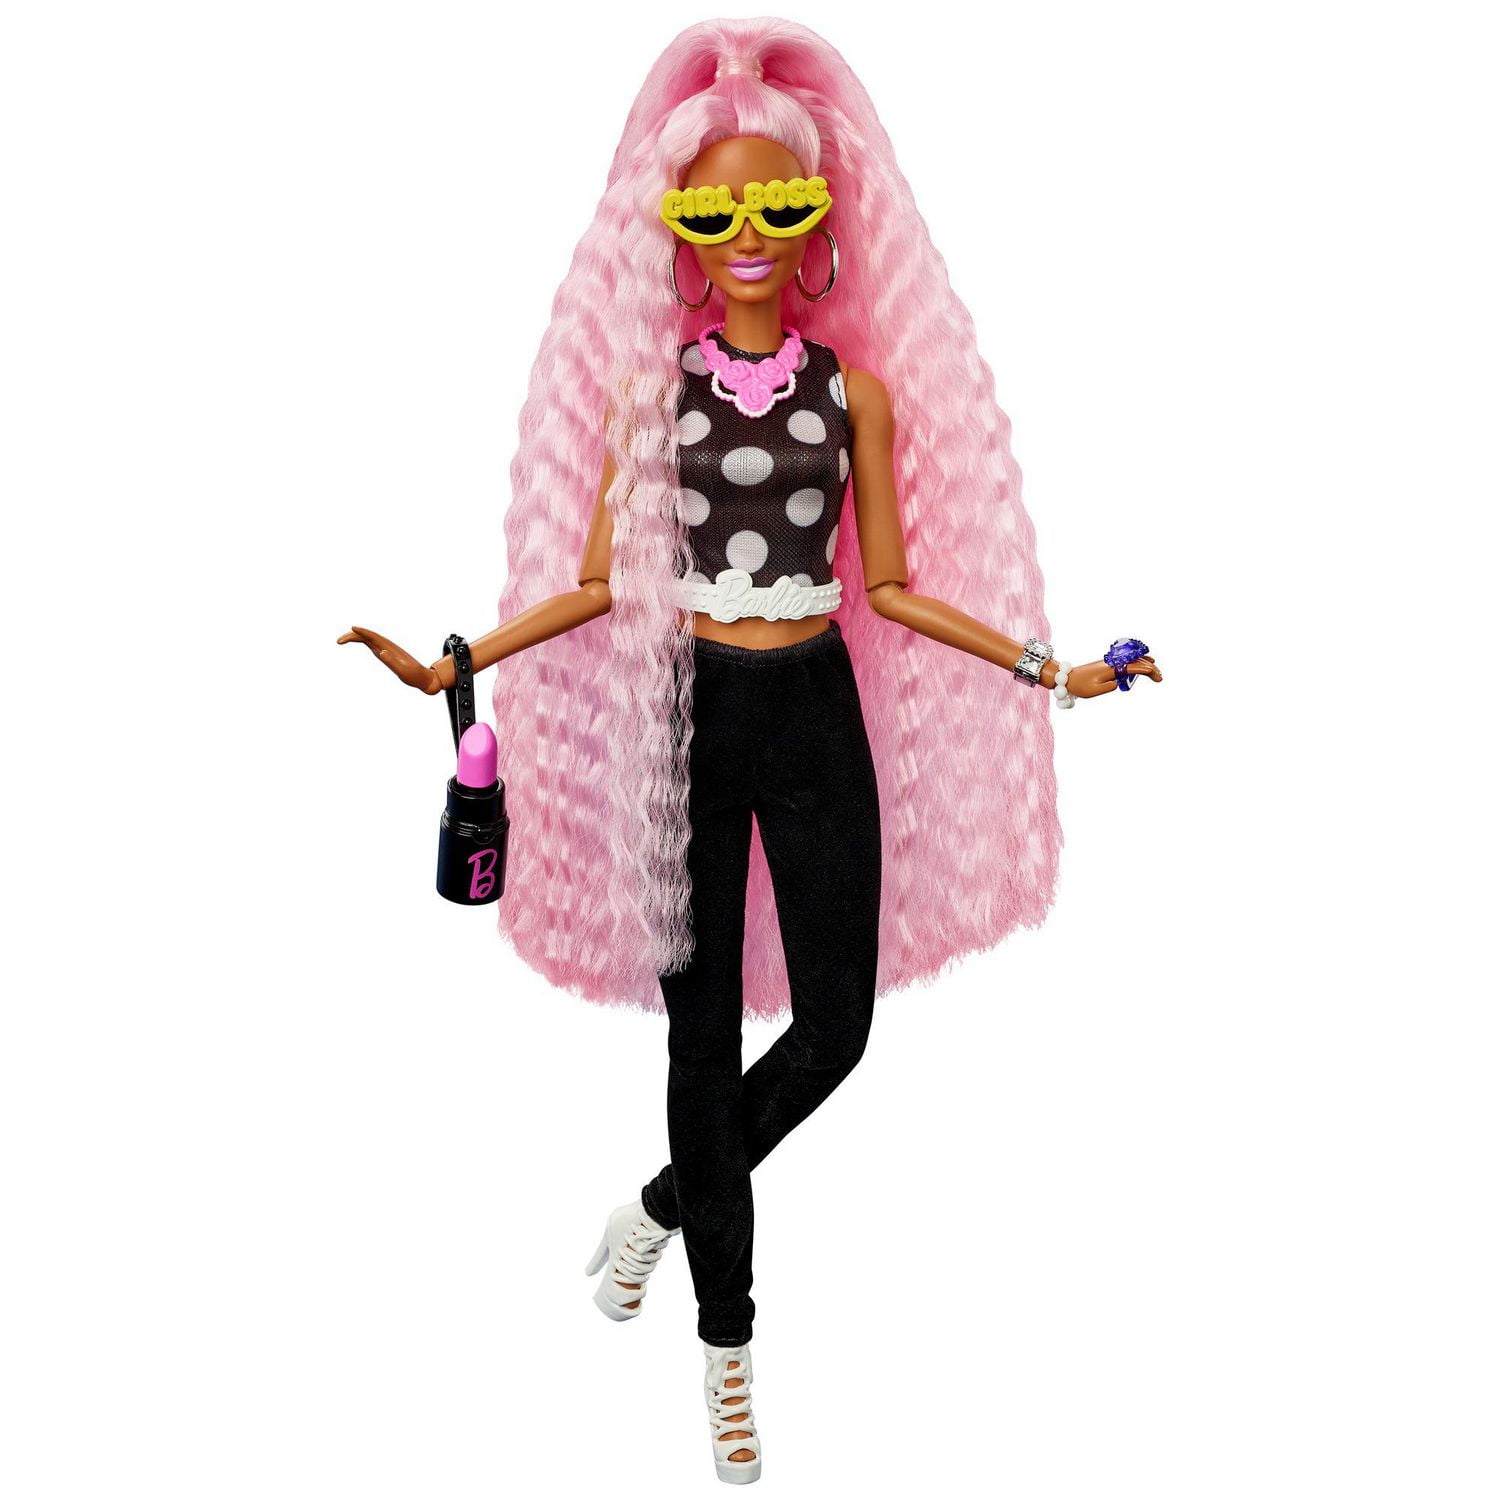 Barbie Extra Deluxe Doll & Accessories Set with Pet, Mix & Match Pieces for  30+ Looks 